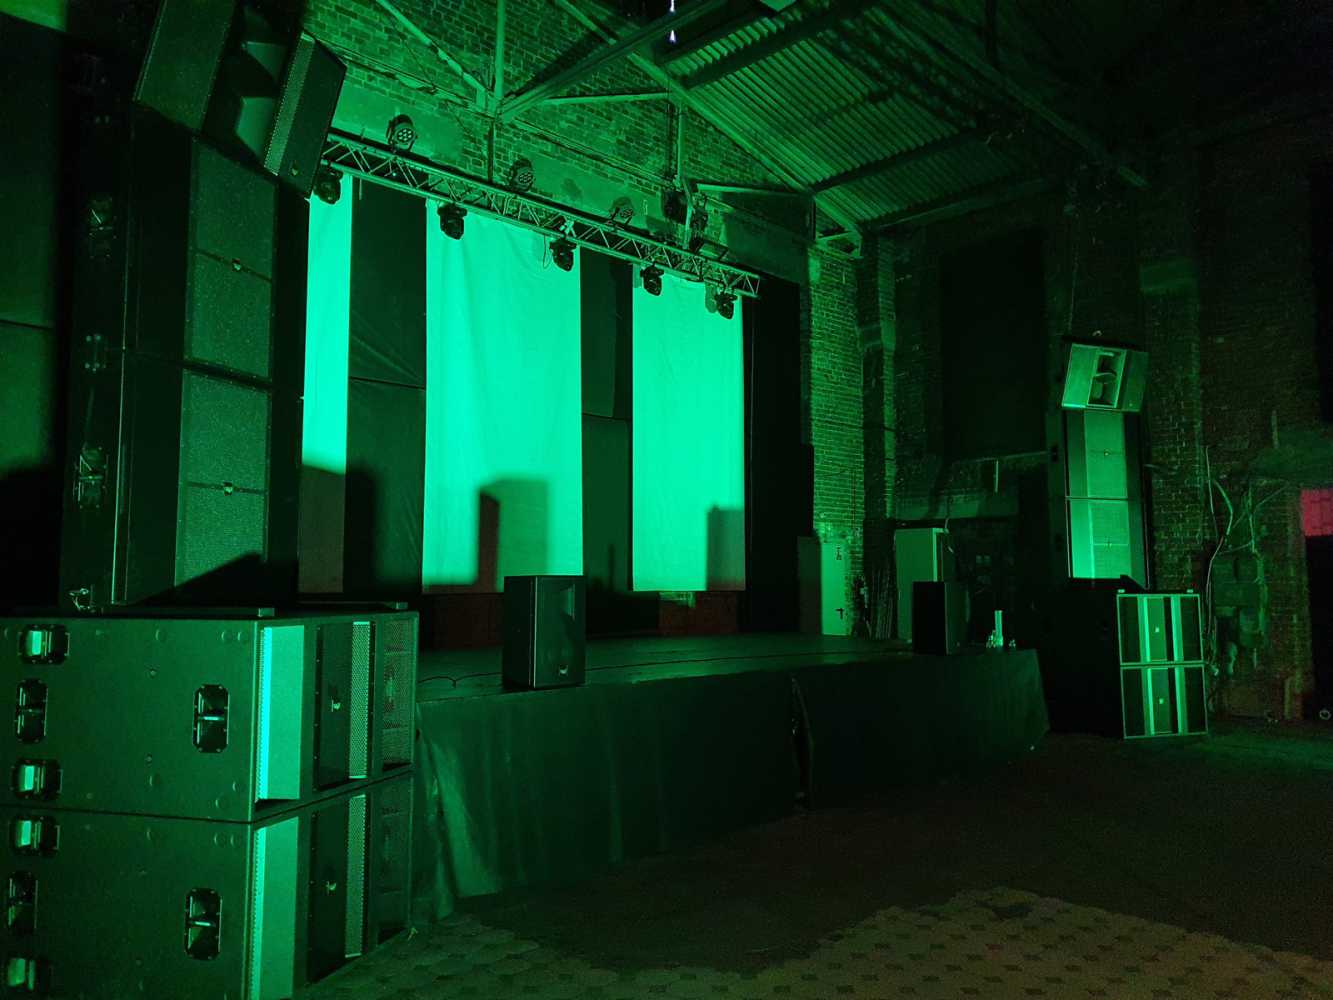 The systems were designed and installed by Wise Clubs and supplied by Arcade Audio